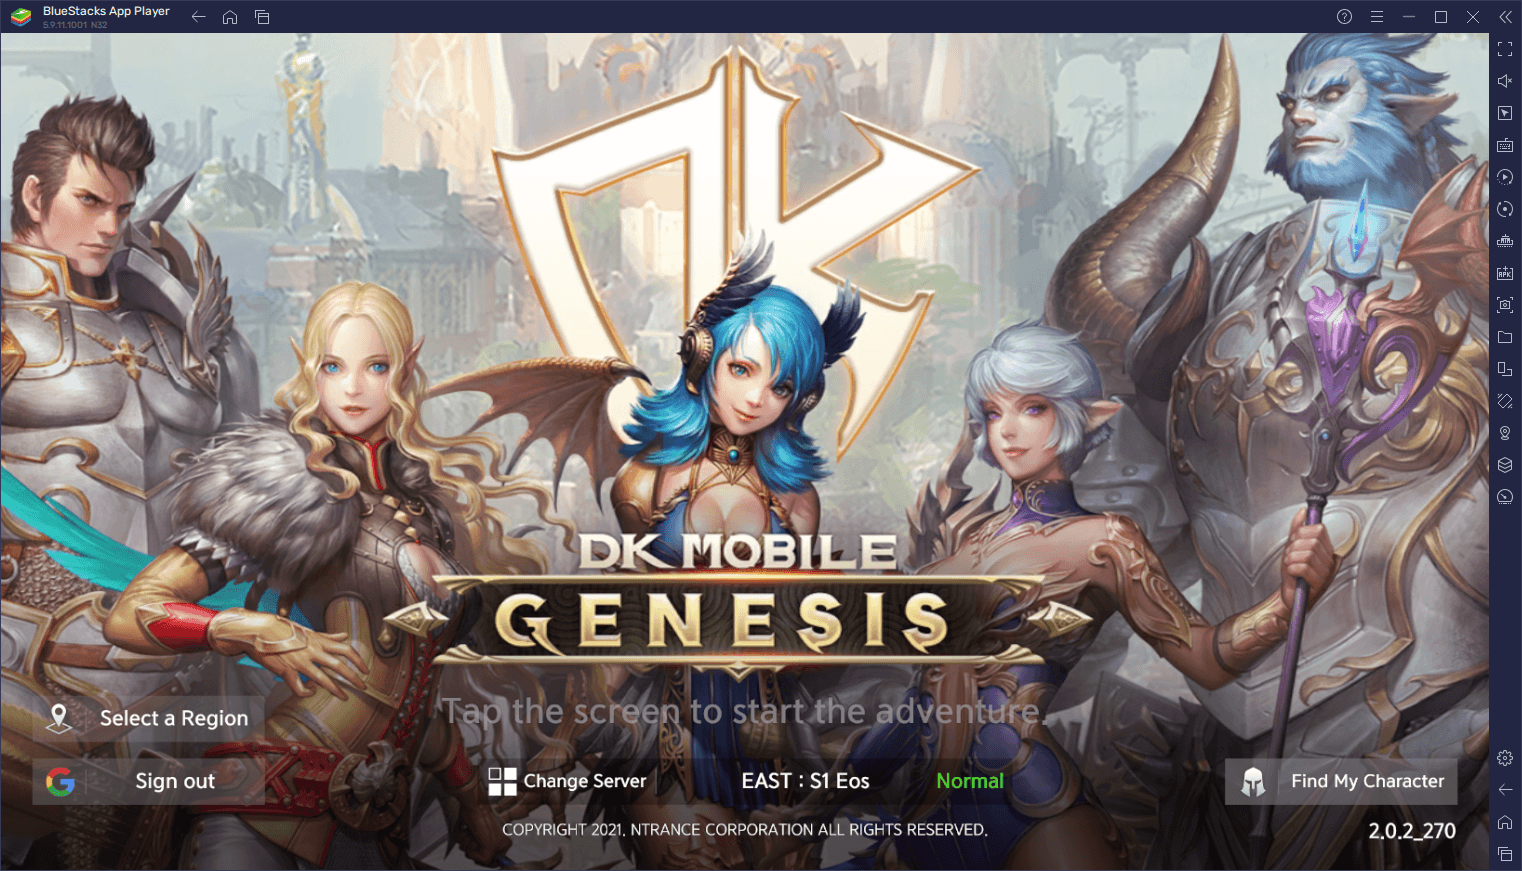 DK Mobile: Genesis on PC - How to Use BlueStacks to Optimize Your Gameplay in This New Mobile MMORPG